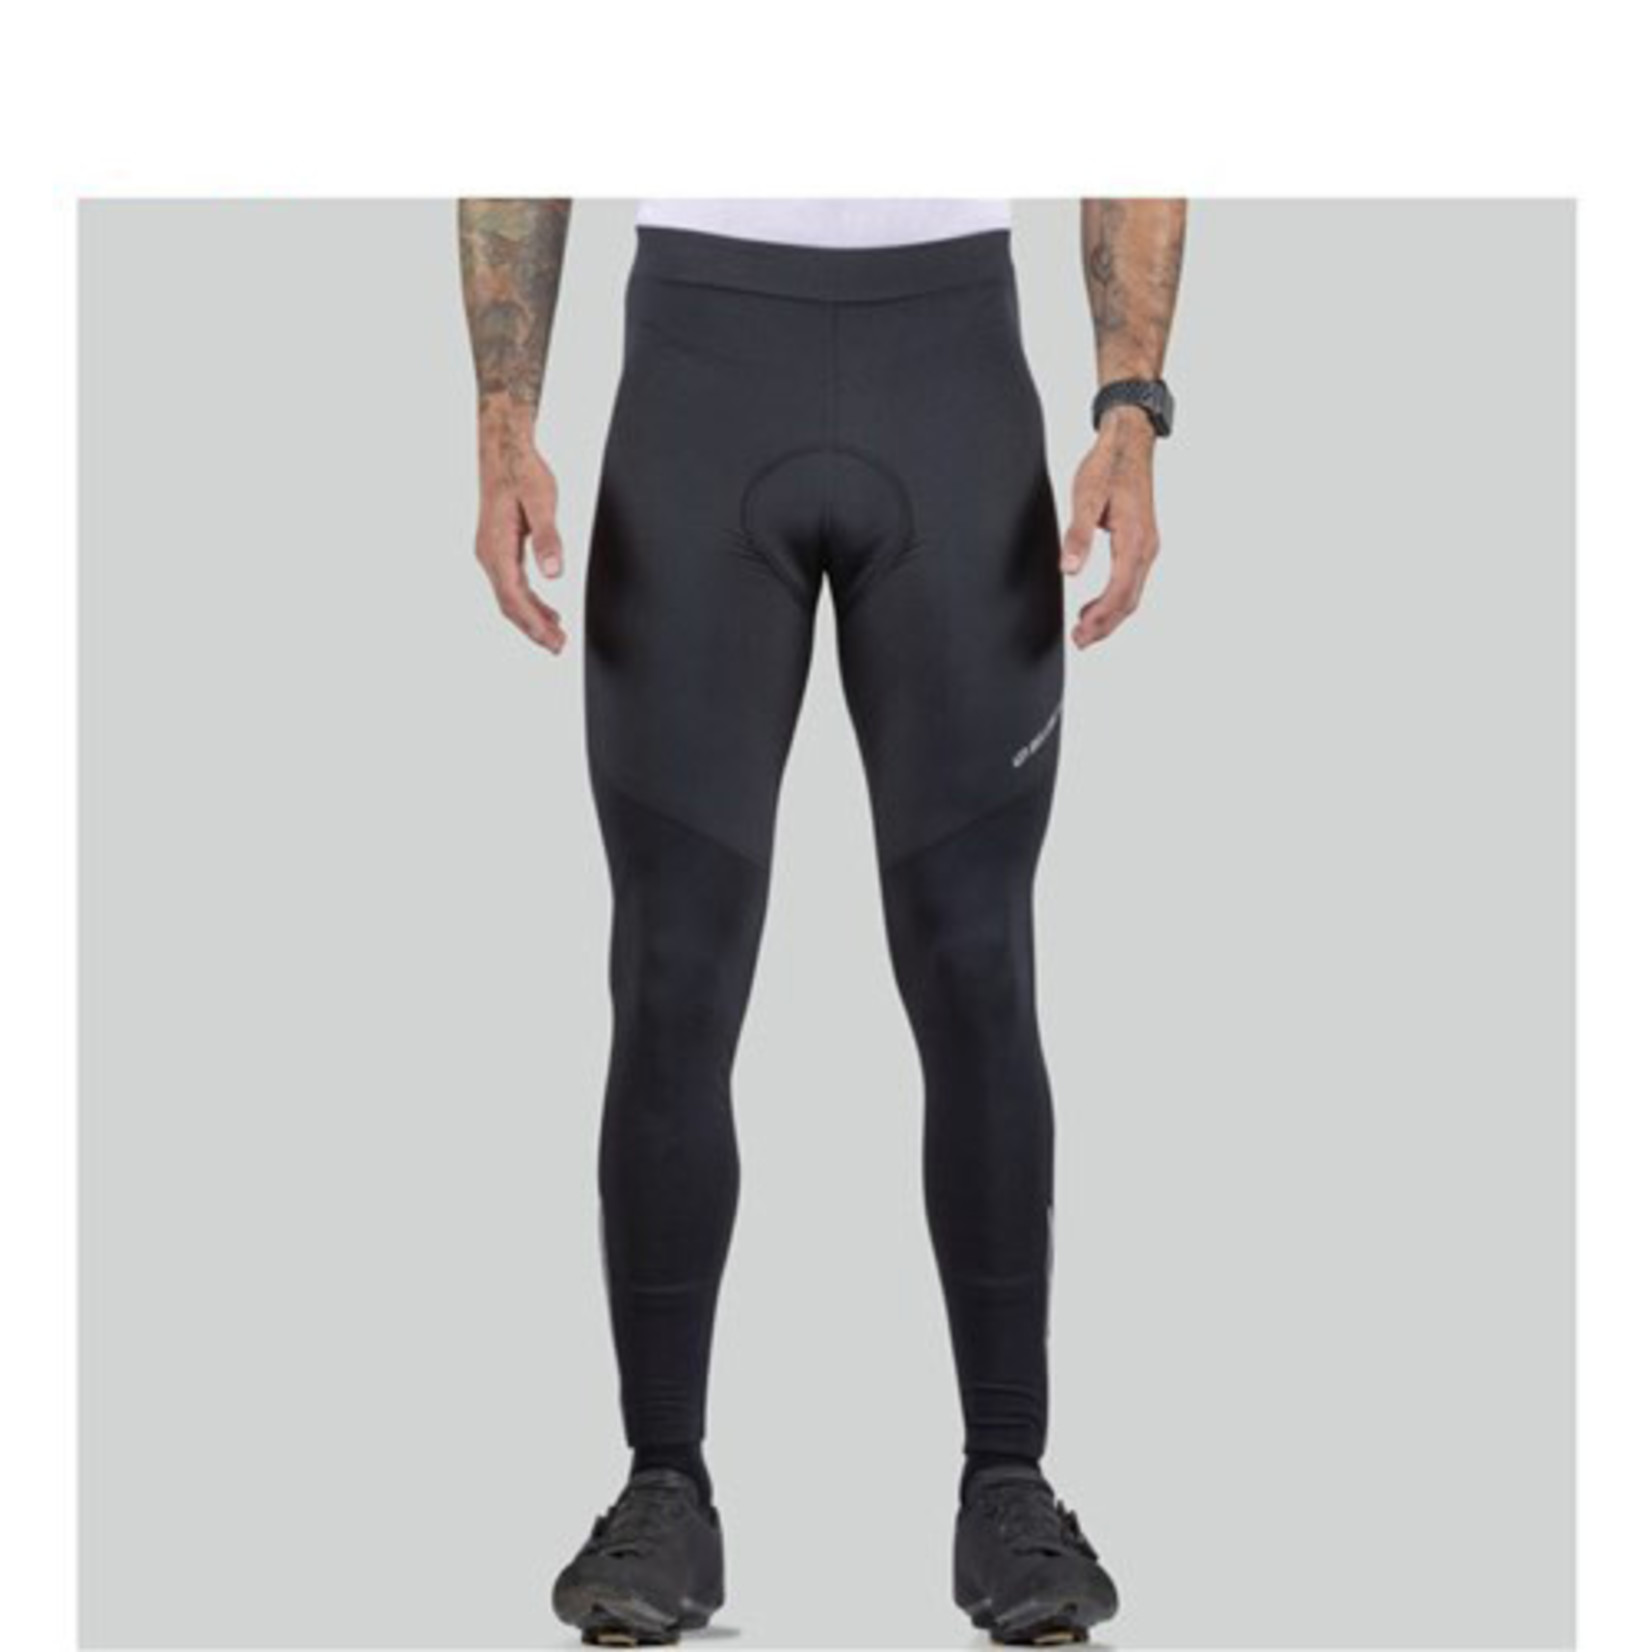 Bellwether Bellwether Men's Cycling Fitted - Thermaldress Tights With Chamois - Contour Pro